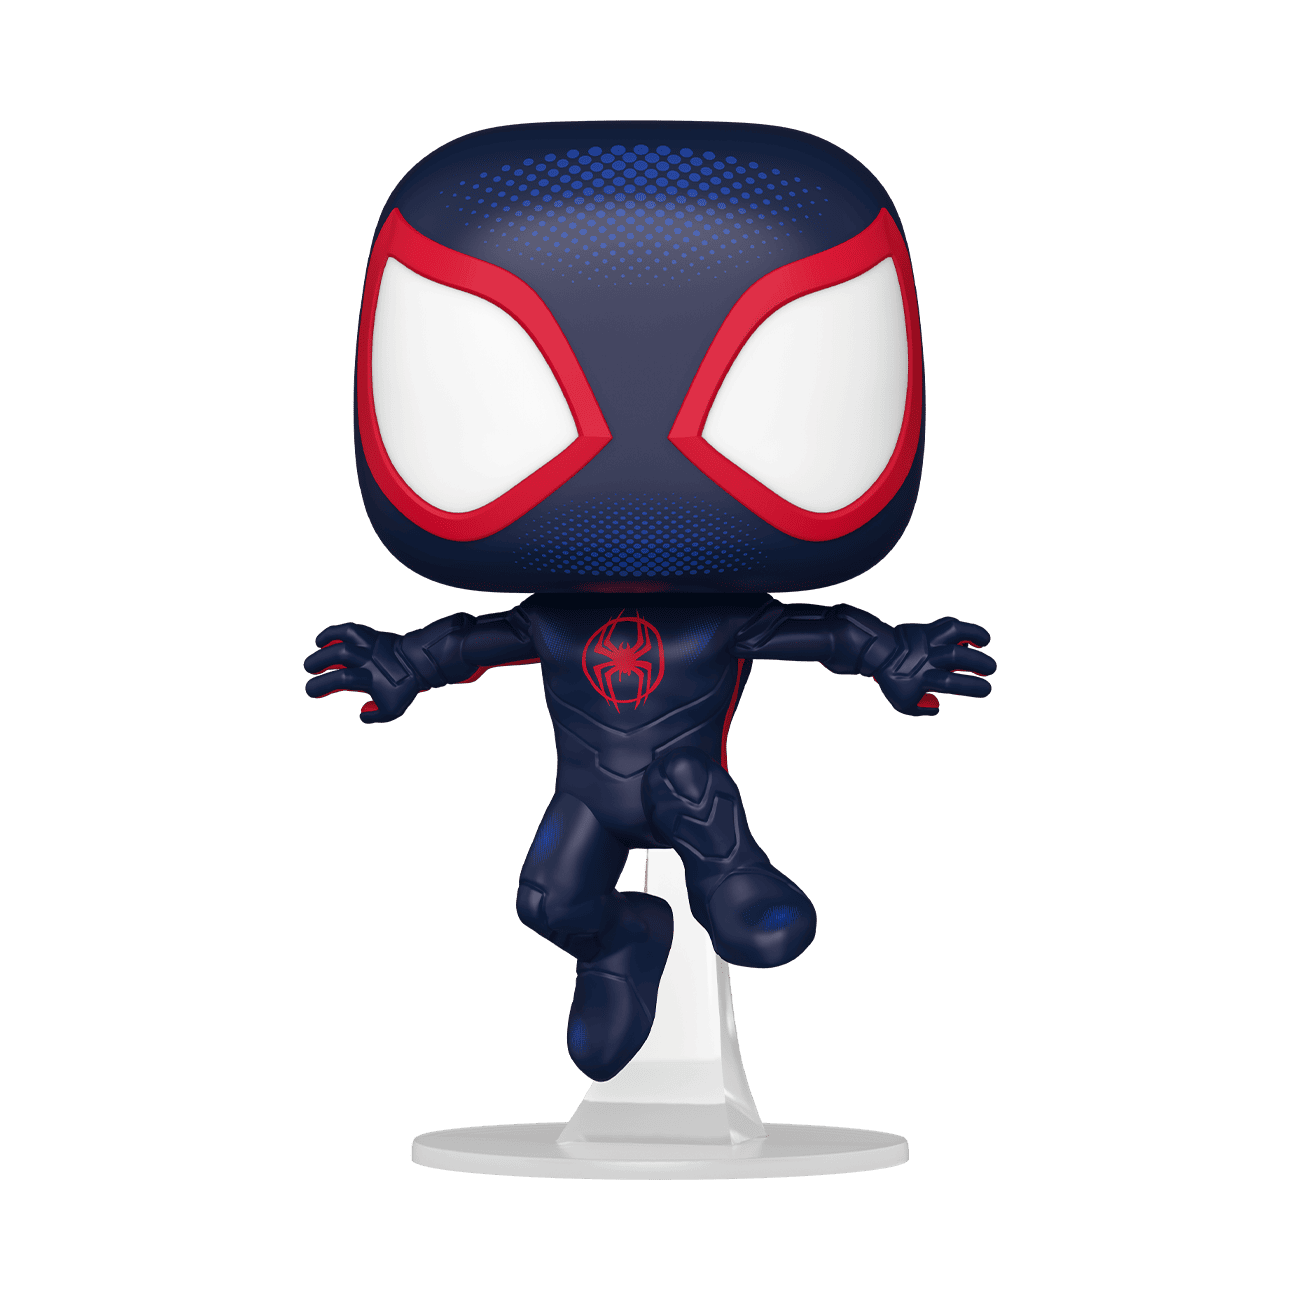 The Target exclusive Jumbo Pop! Spider-Man from Spider-Man: Across the Spider-Verse.